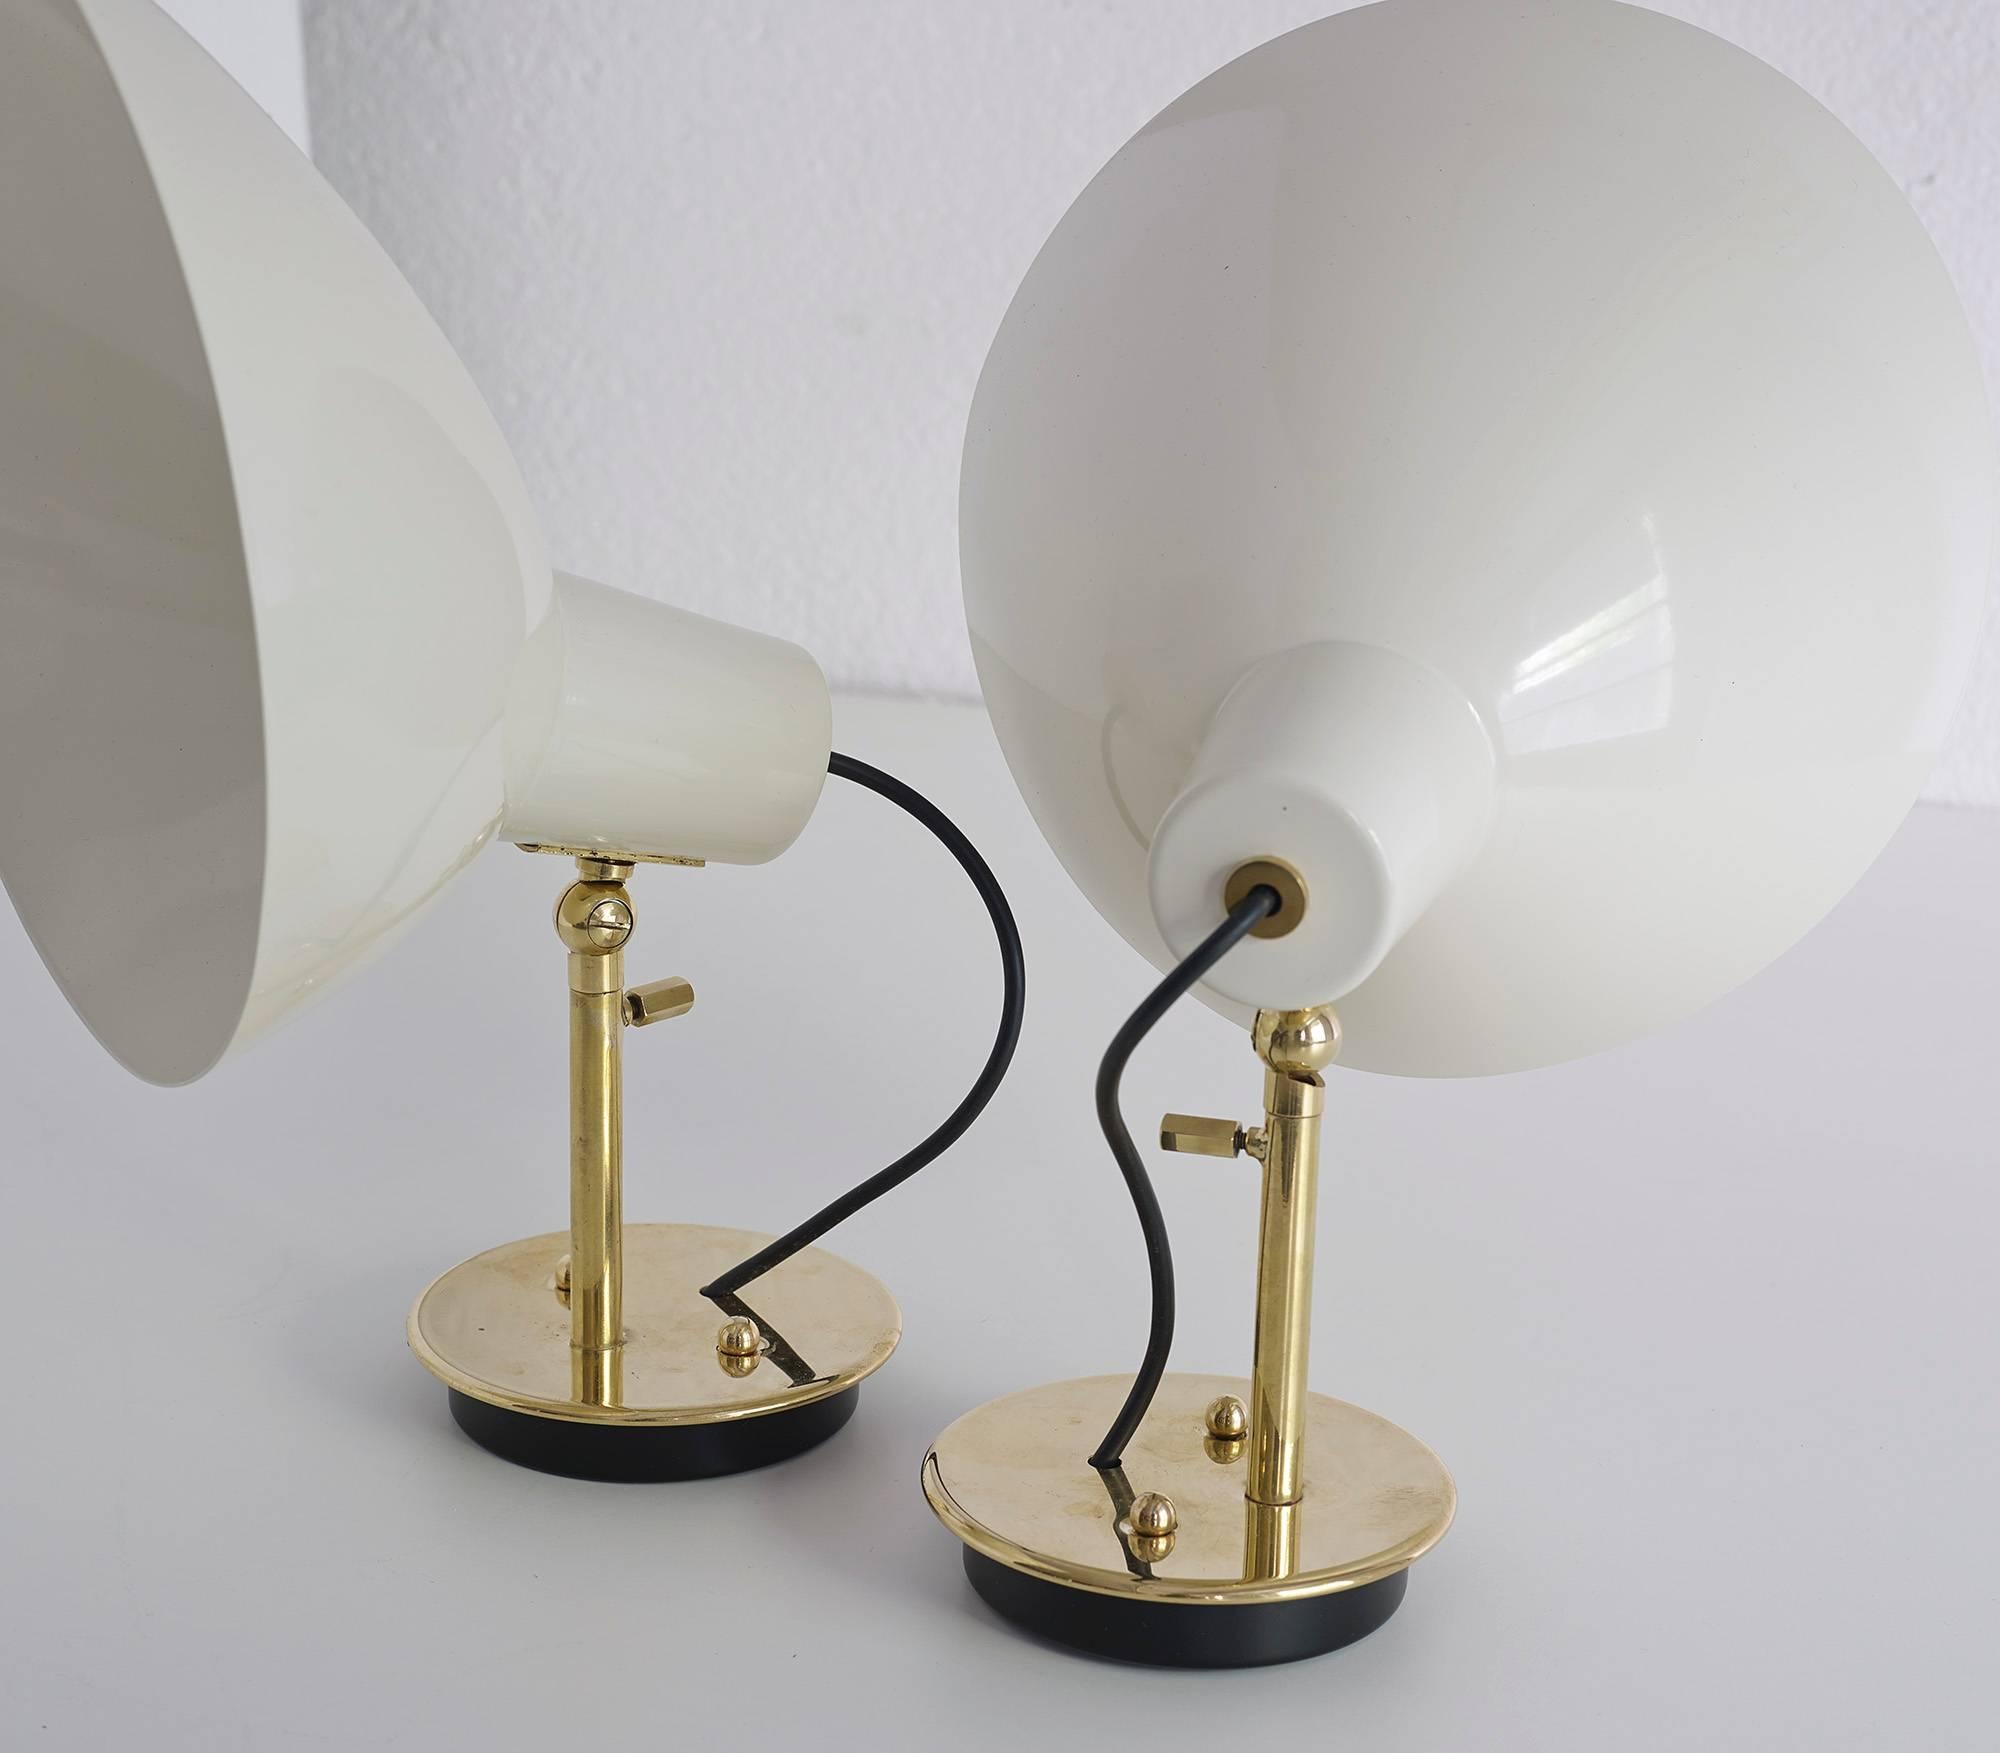 Painted Pair of Model 2 Sconces by Vittoriano Vigano, Arteluce, 1950